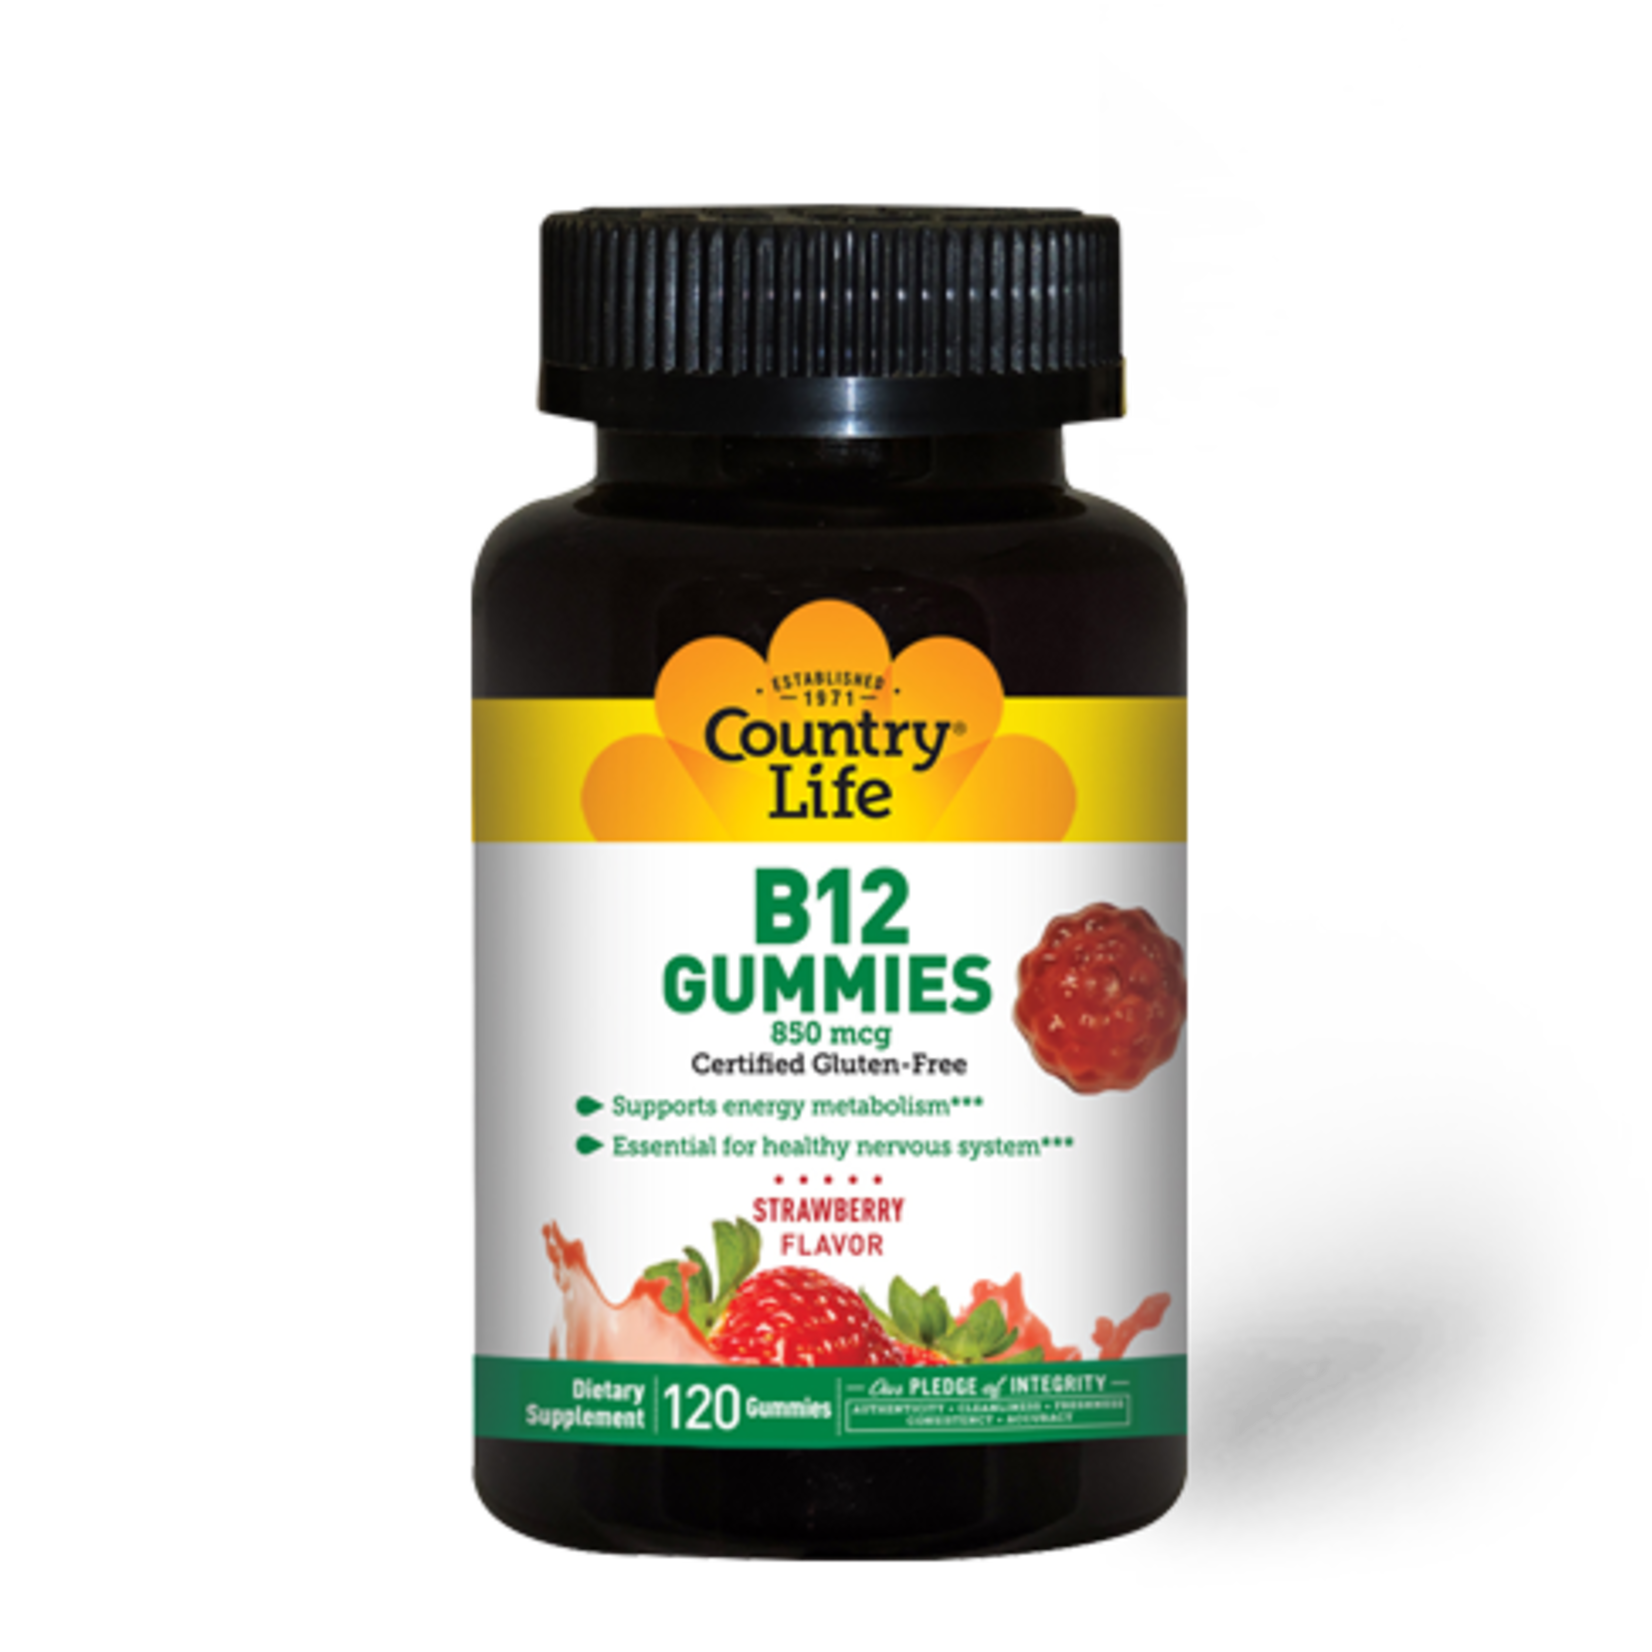 Country Life Country Life B12 Gummies